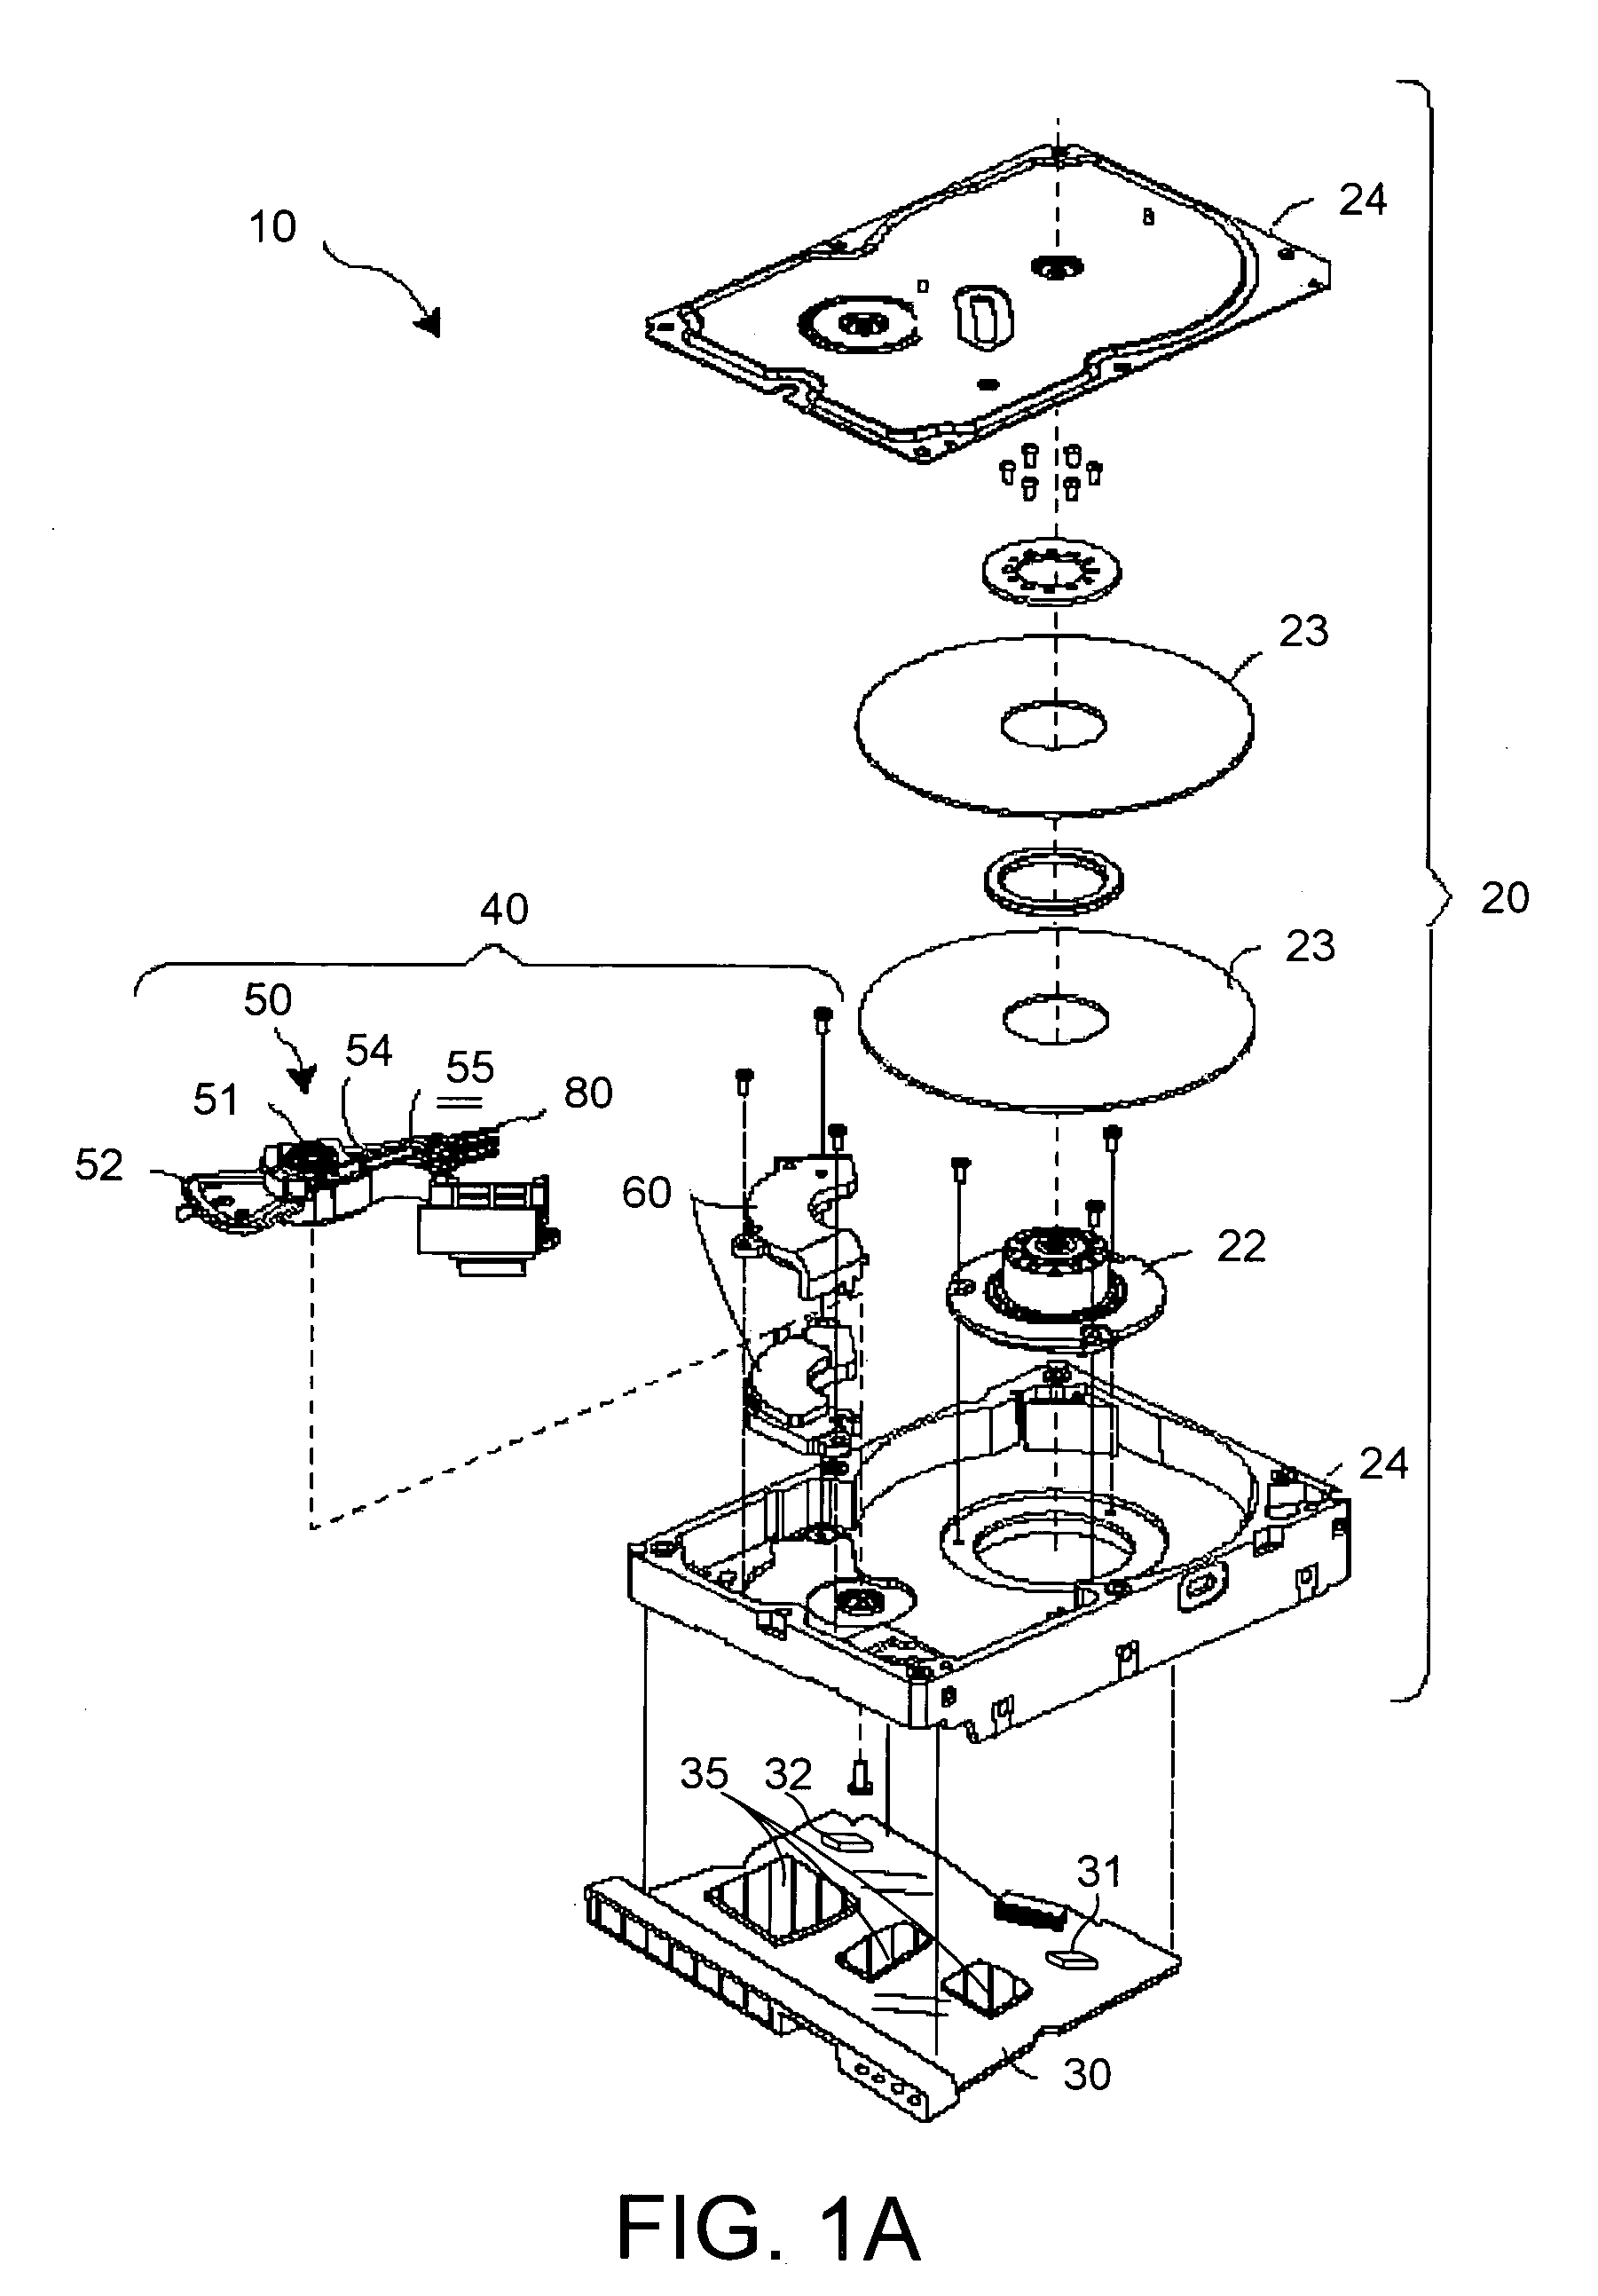 Reducing effects of rotational vibration in disk drive